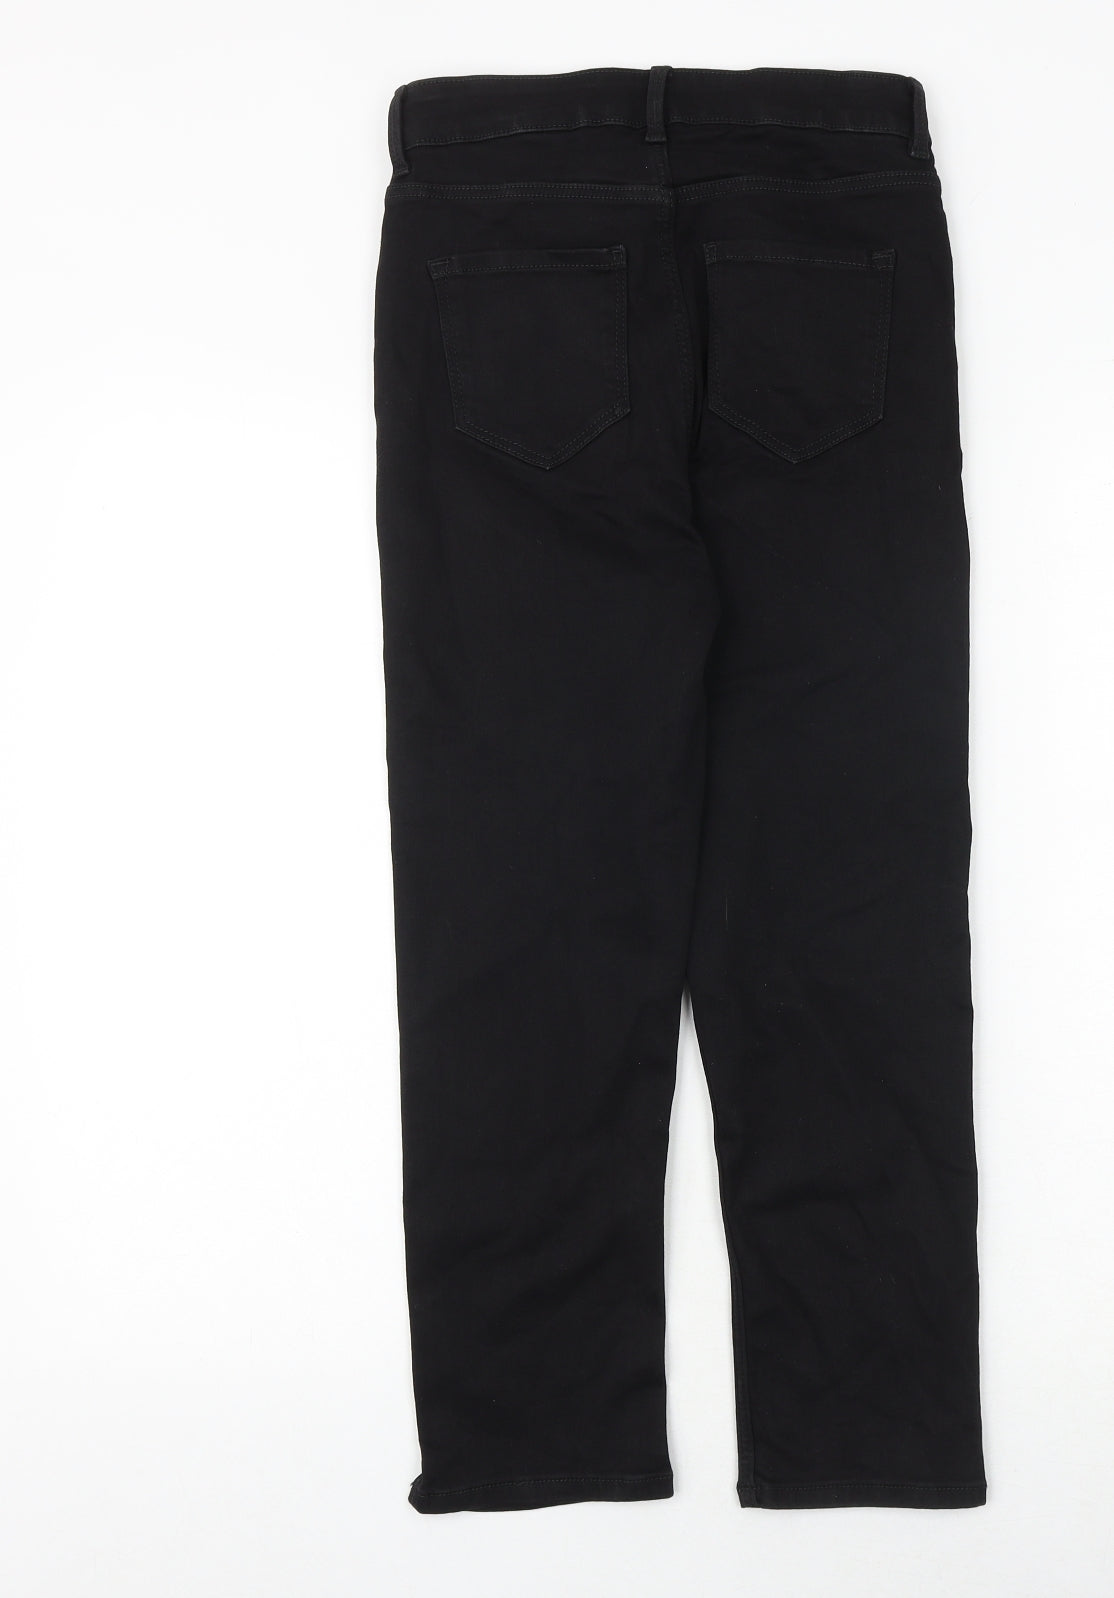 Marks and Spencer Womens Black Cotton Straight Jeans Size 8 Regular Zip - Cropped